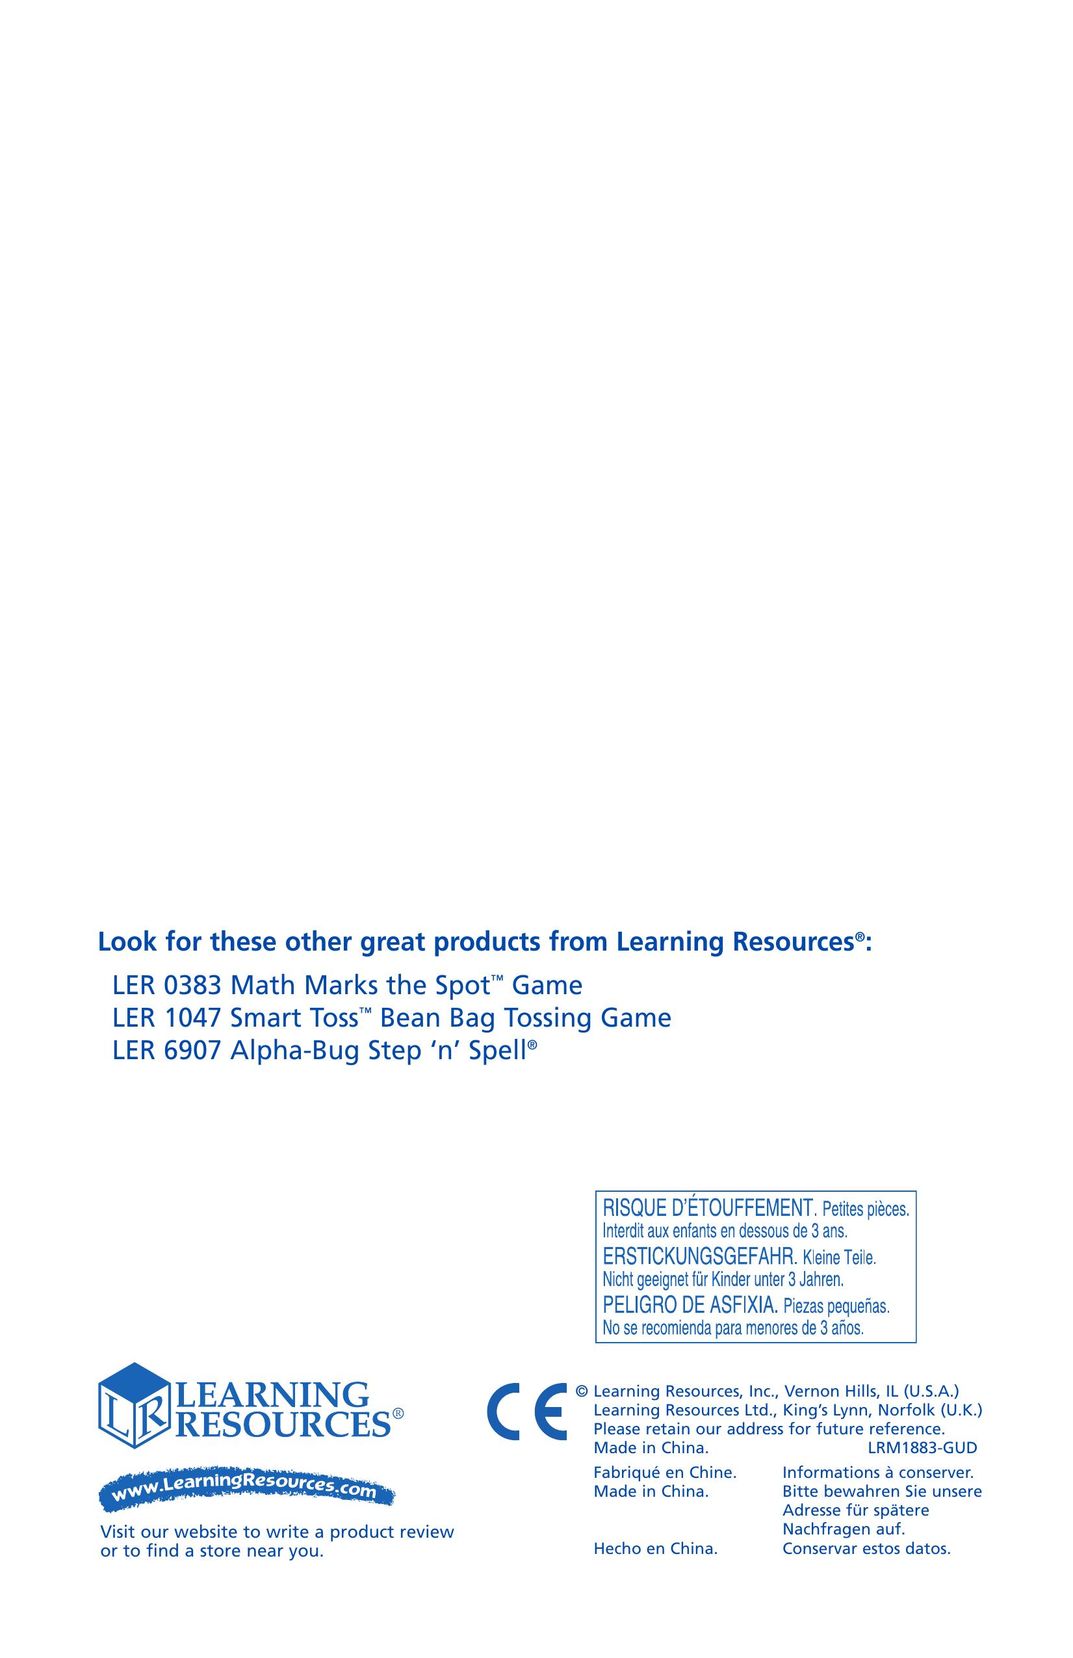 Learning Resources LER 1883 Baby Toy User Manual (Page 1)